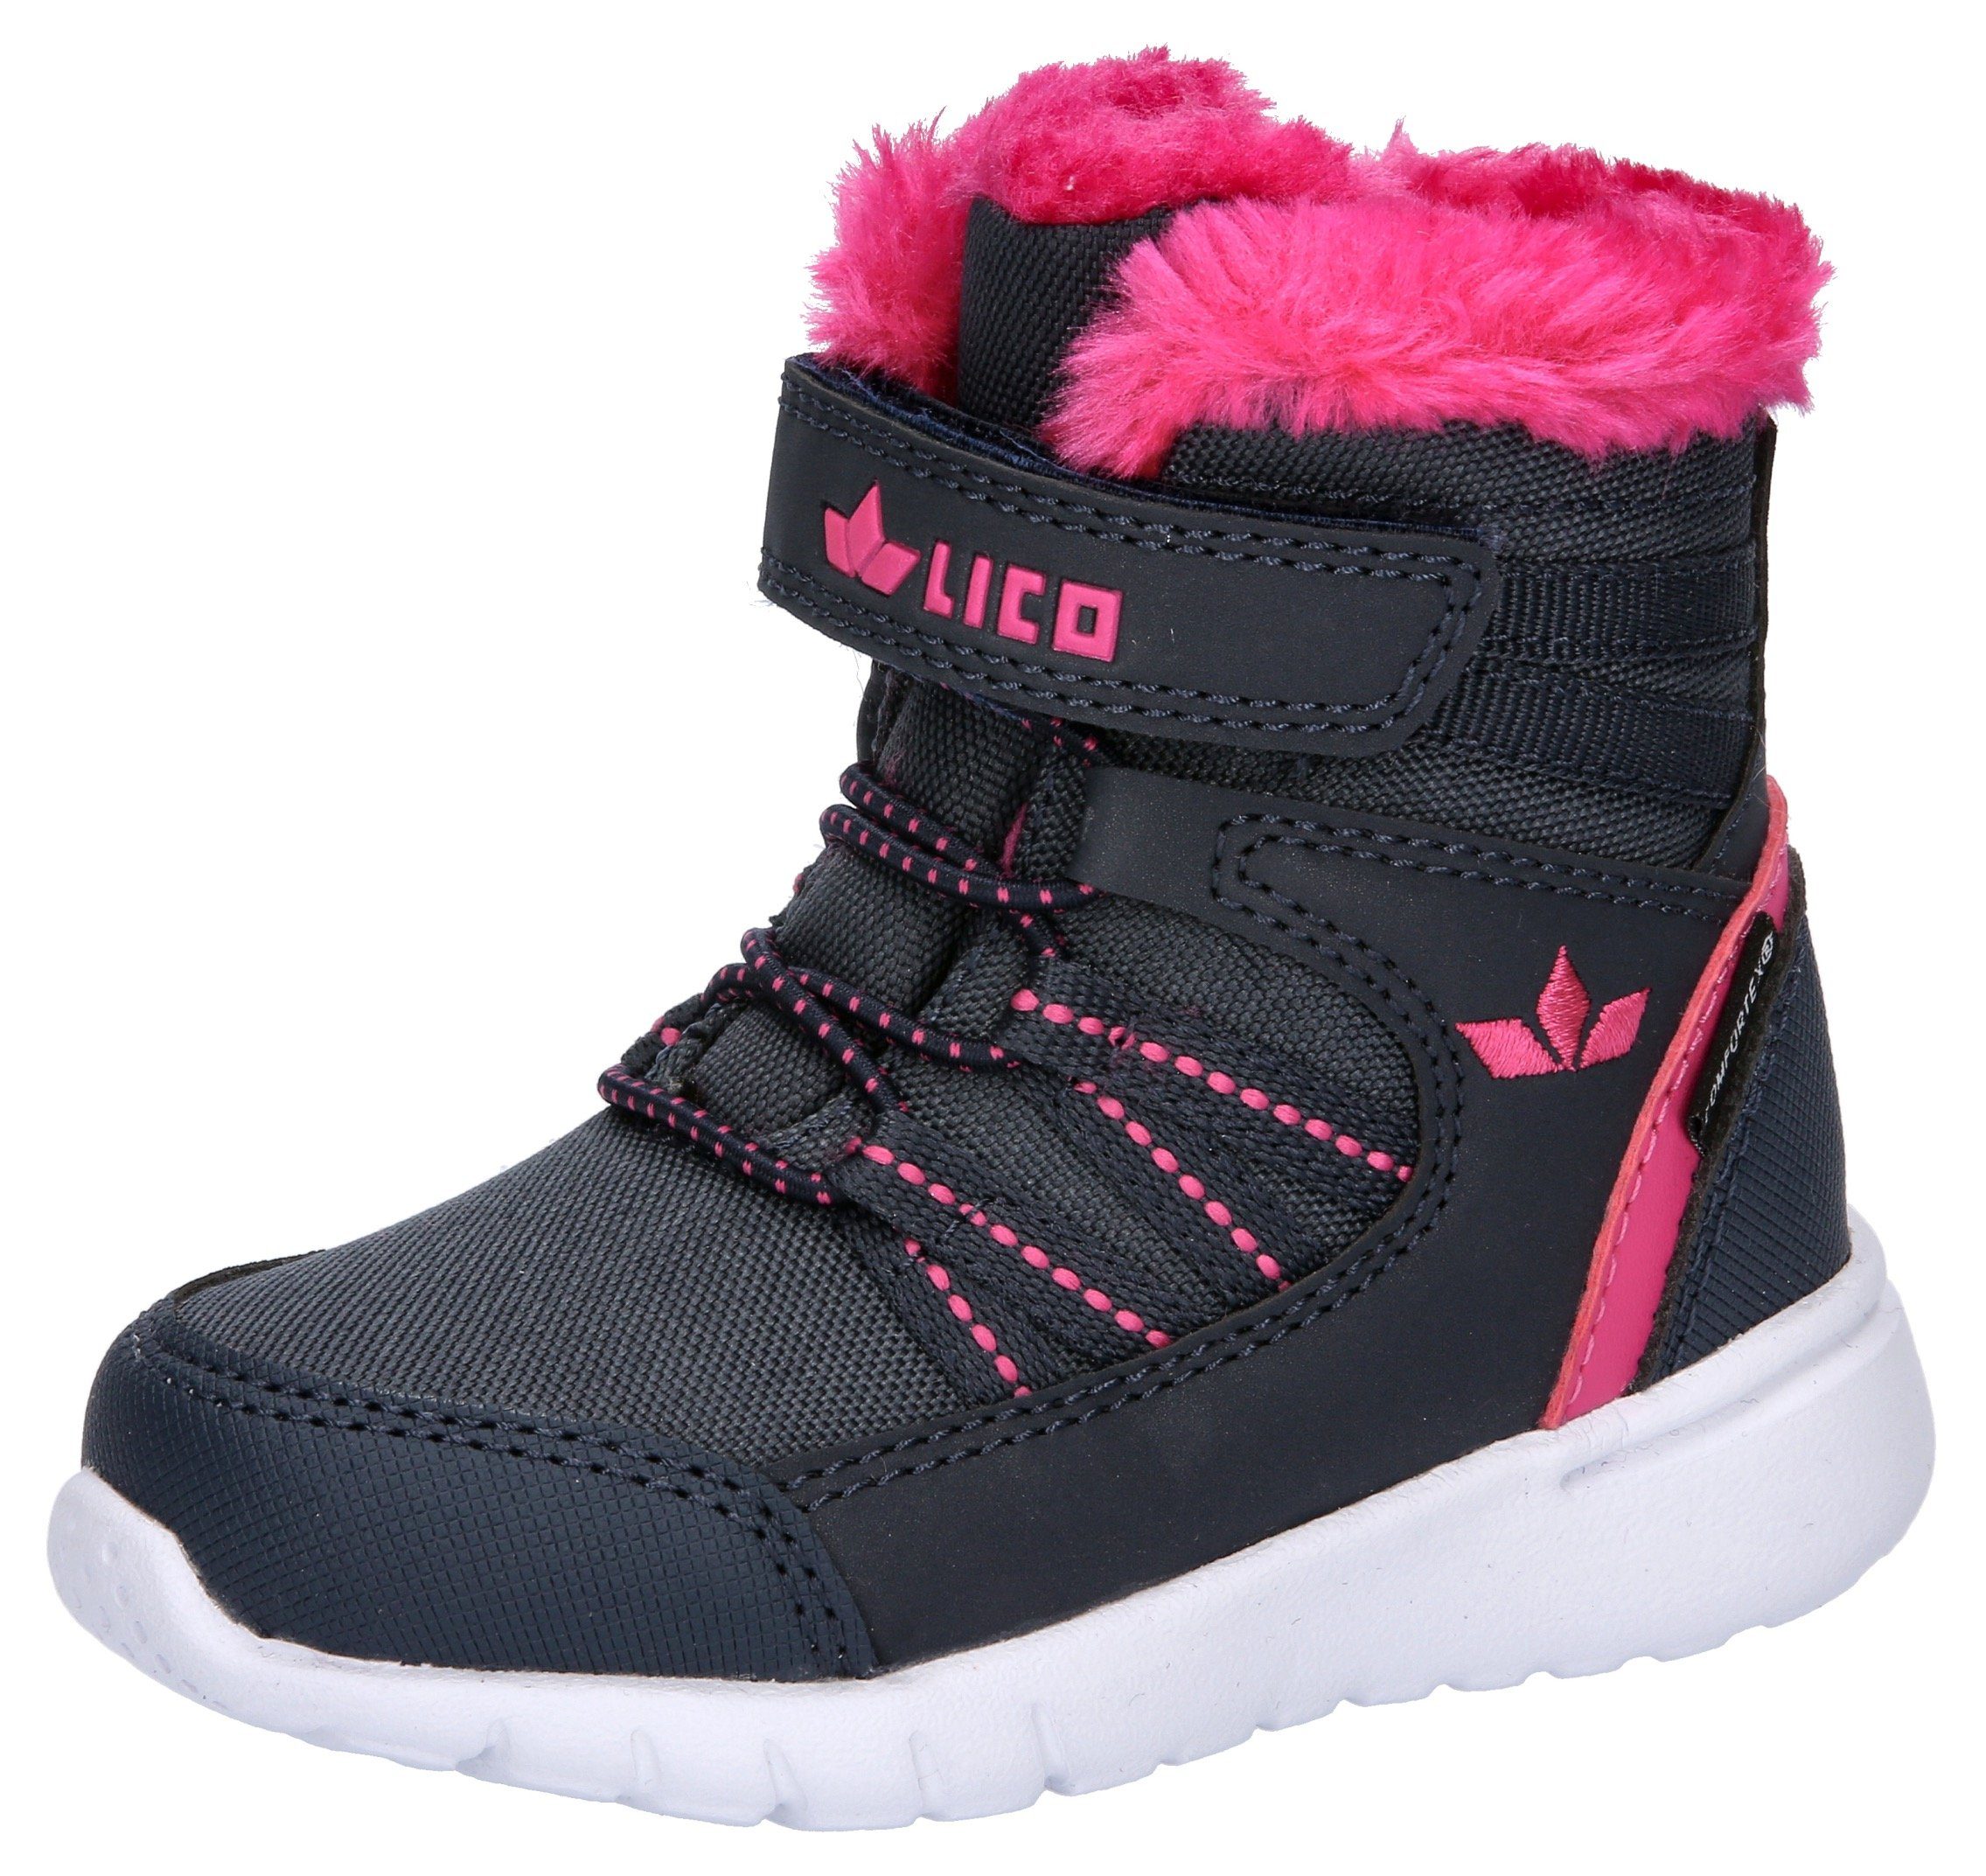 Lico Shalby Winterboots mit Warmfutter navy-pink